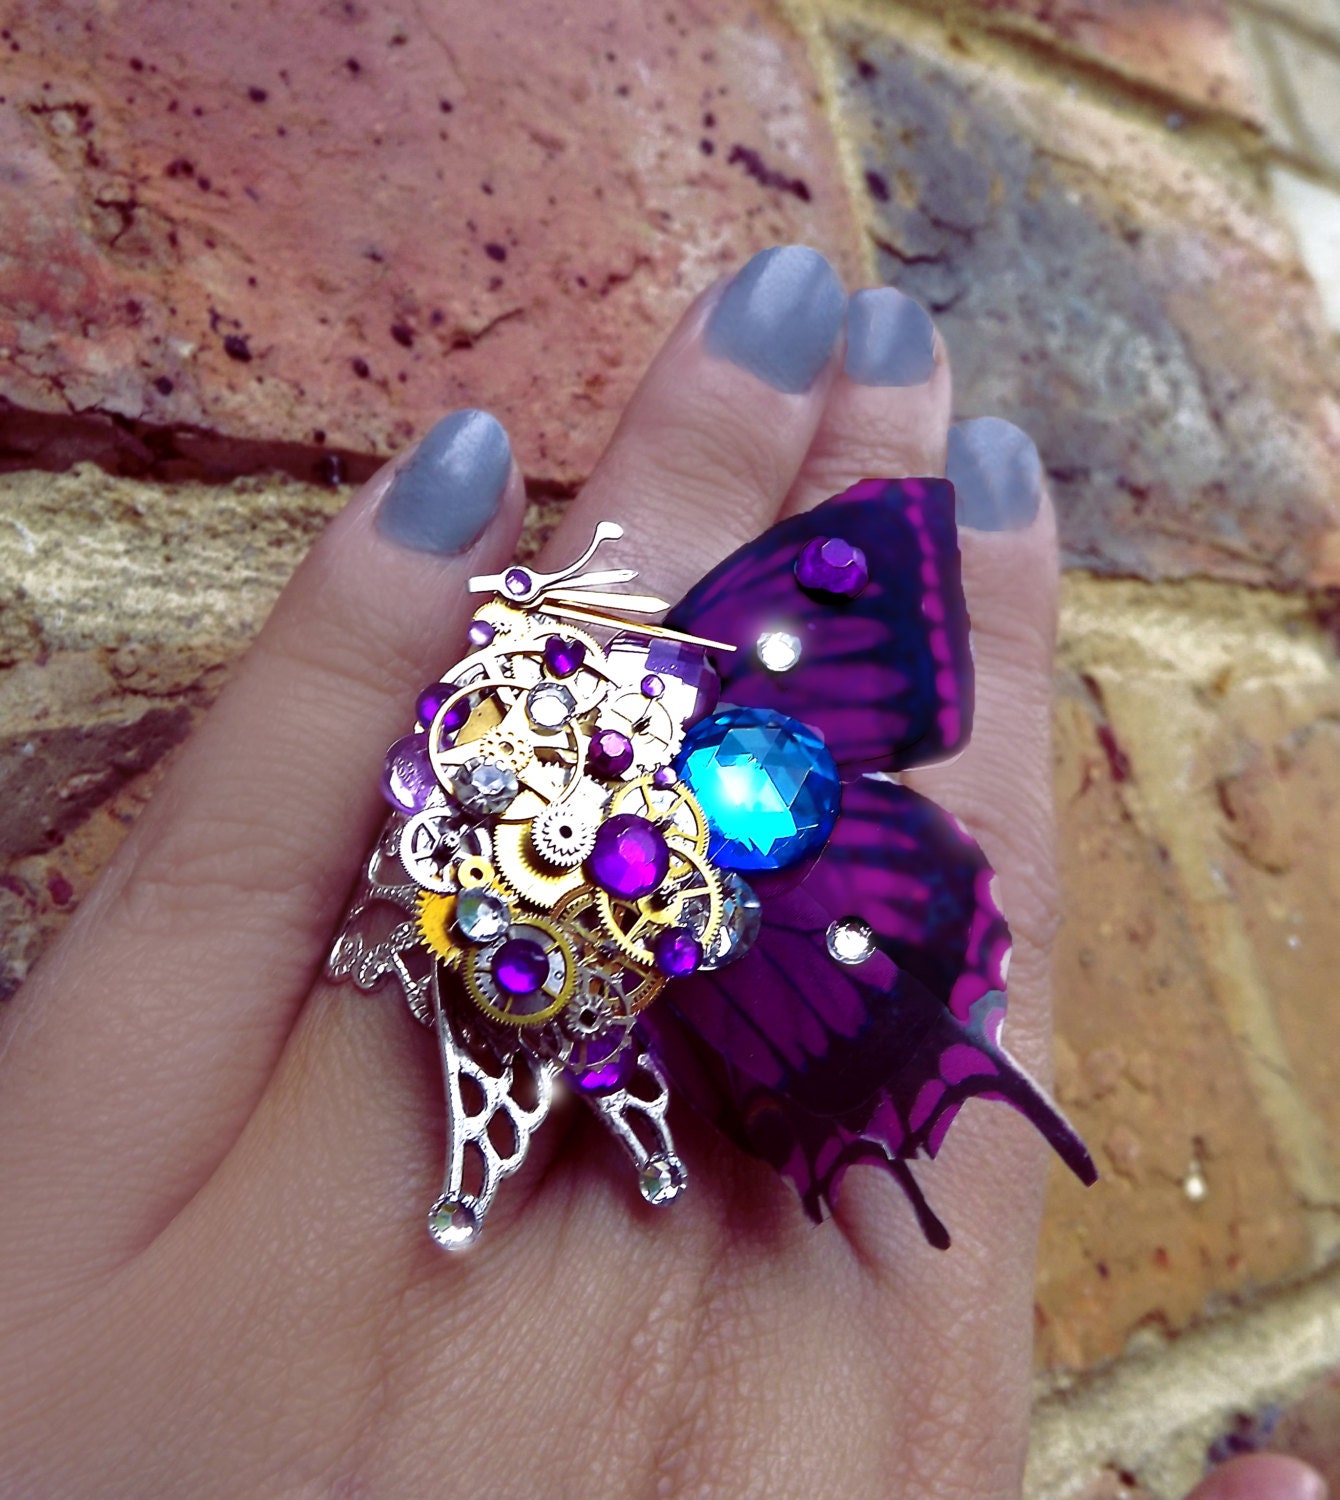 Steampunk ring, butterfly ring, purple ring, silver steampunk, filigree ring, cocktail boho ring, OOAK, magic ring, watch gear ring, art